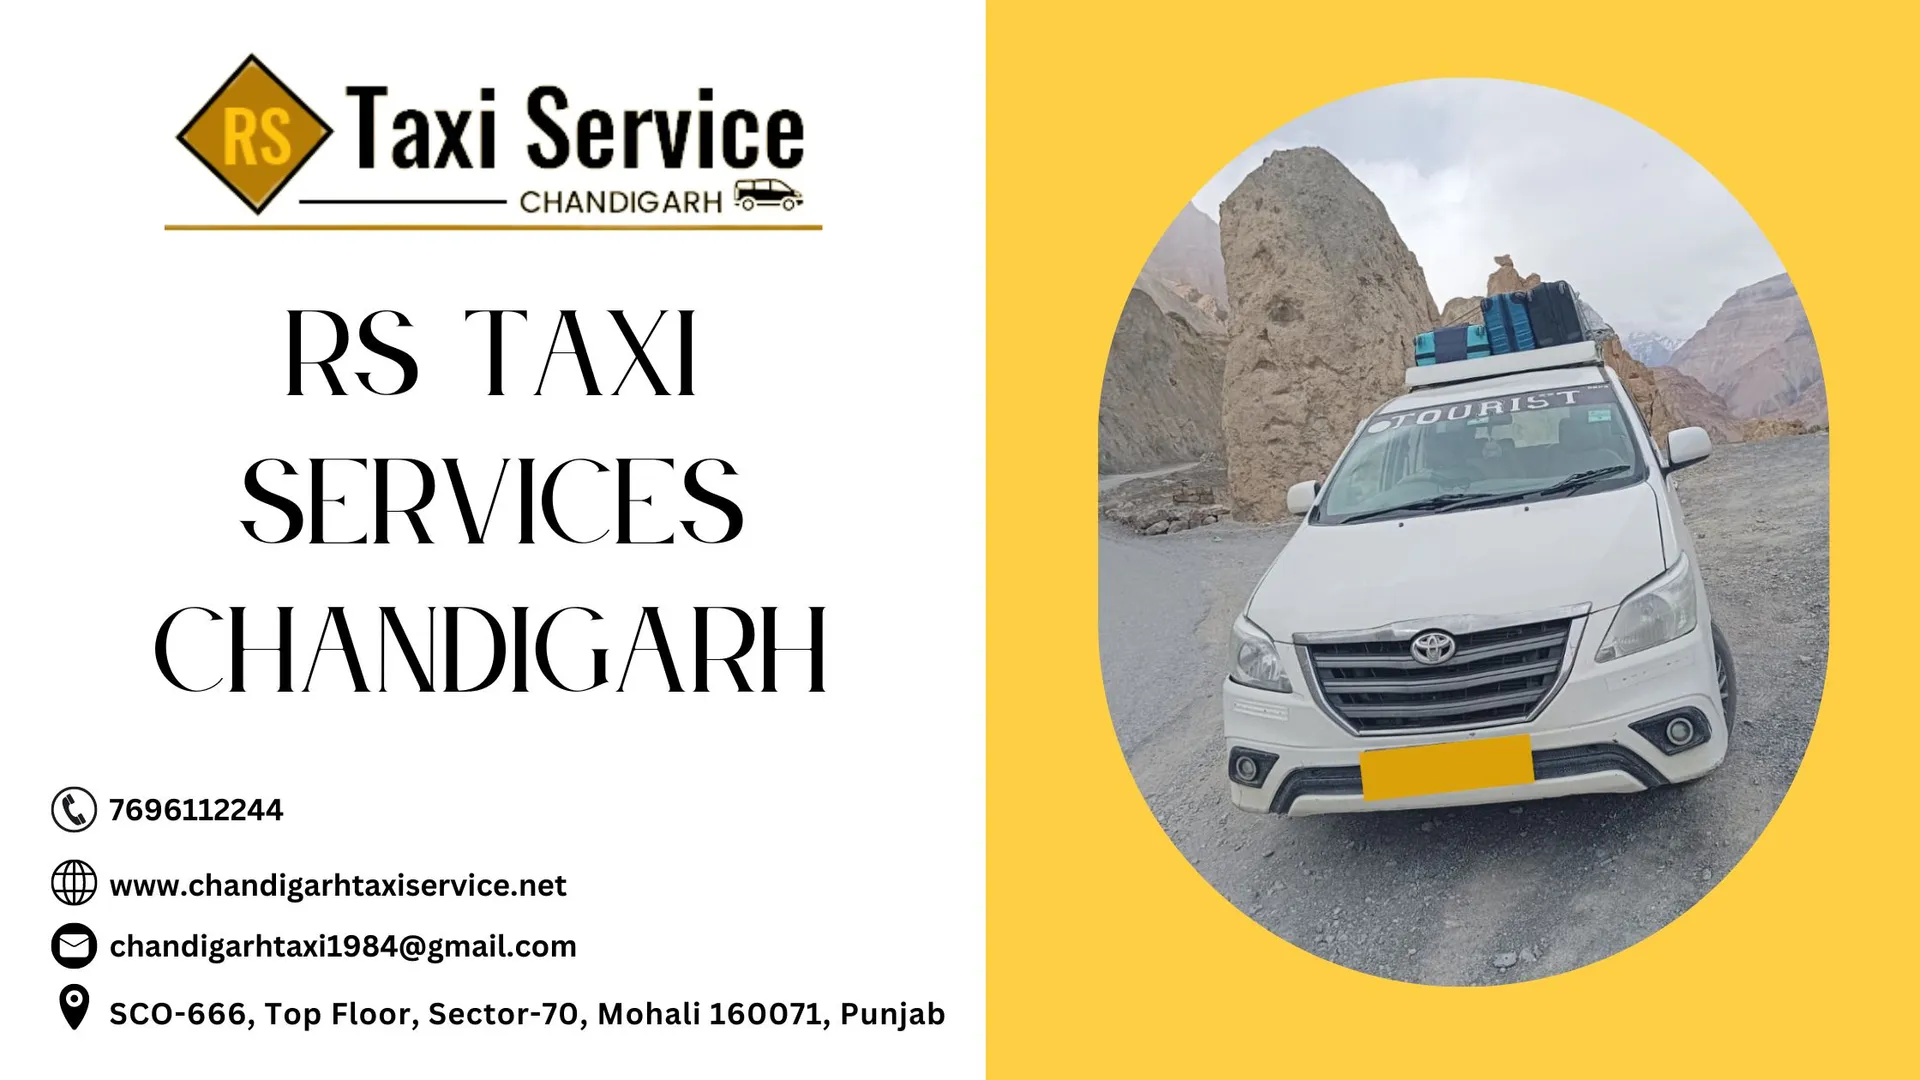 RS Taxi Service Chandigarh - Your Trusted Choice for Chandigarh Taxi Services 

Experience reliable and efficient transportation with RS Taxi Service Chandigarh. As a leading taxi service provider, we take pride in offering top-notch Chandigarh taxi services. 

Choose RS Taxi Service for a delightful and enjoyable ride across Chandigarh. Trust us to be your travel partner and make your taxi experience memorable and delightful. Book your ride now. https://www.chandigarhtaxiservice.net/

Contact Person Name:- Ravi Salaria

Contact no. 7696112244

Address:- SCO-666, Top Floor, Sector-70, Mohali 160071, Punjab

Website:- https://www.chandigarhtaxiservice.net/

Email:- chandigarhtaxi1984@gmail.com